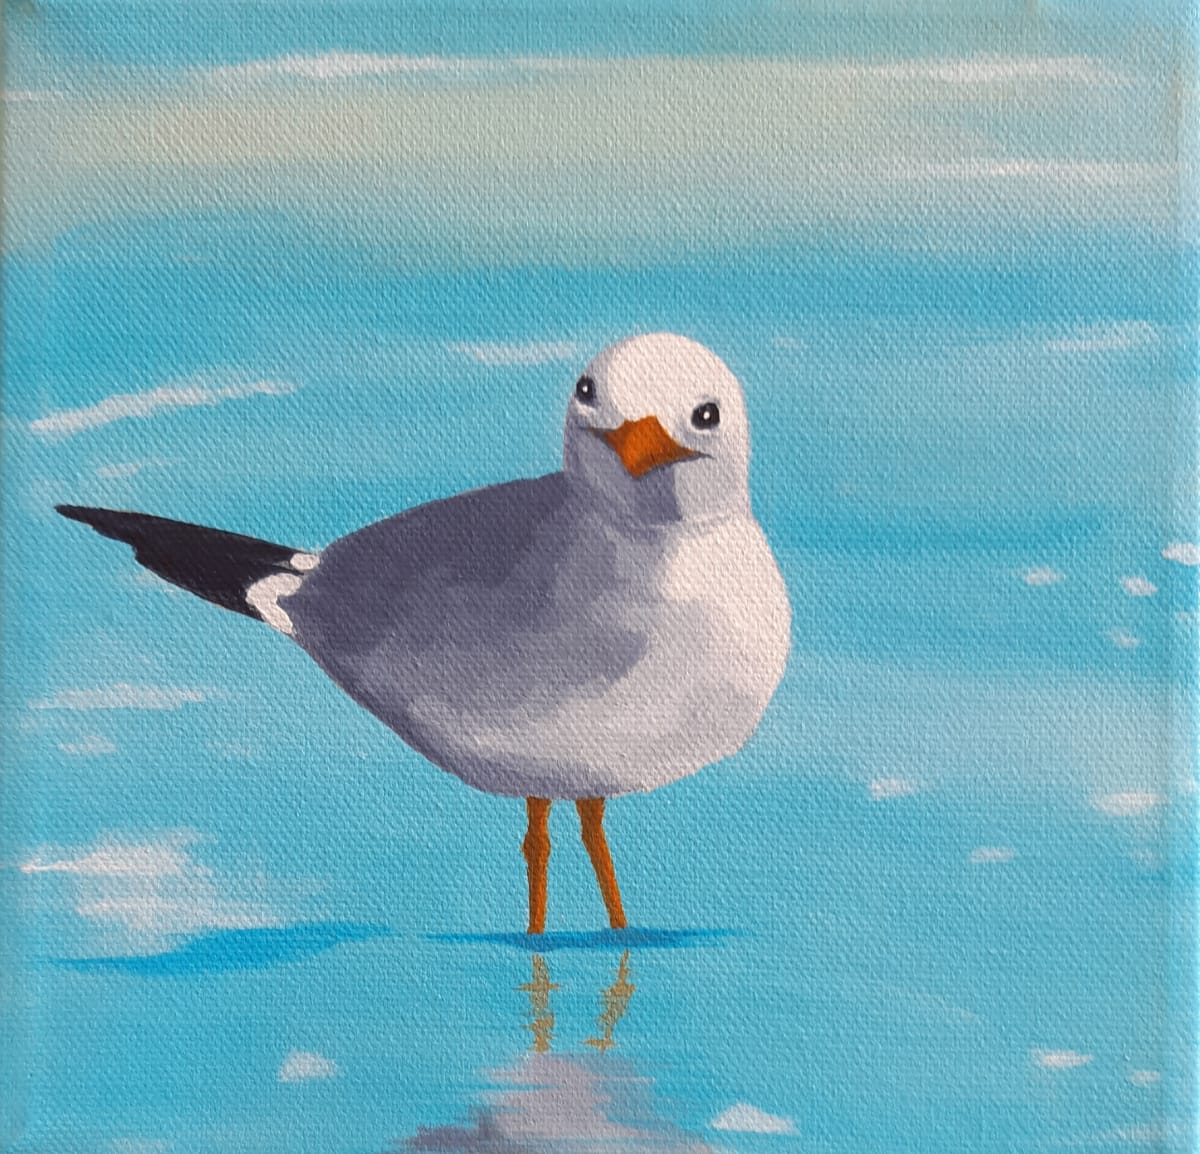 Seagull On The Shore by Jane Thuss  Image: A seagull standing in the blue water of the shoreline.